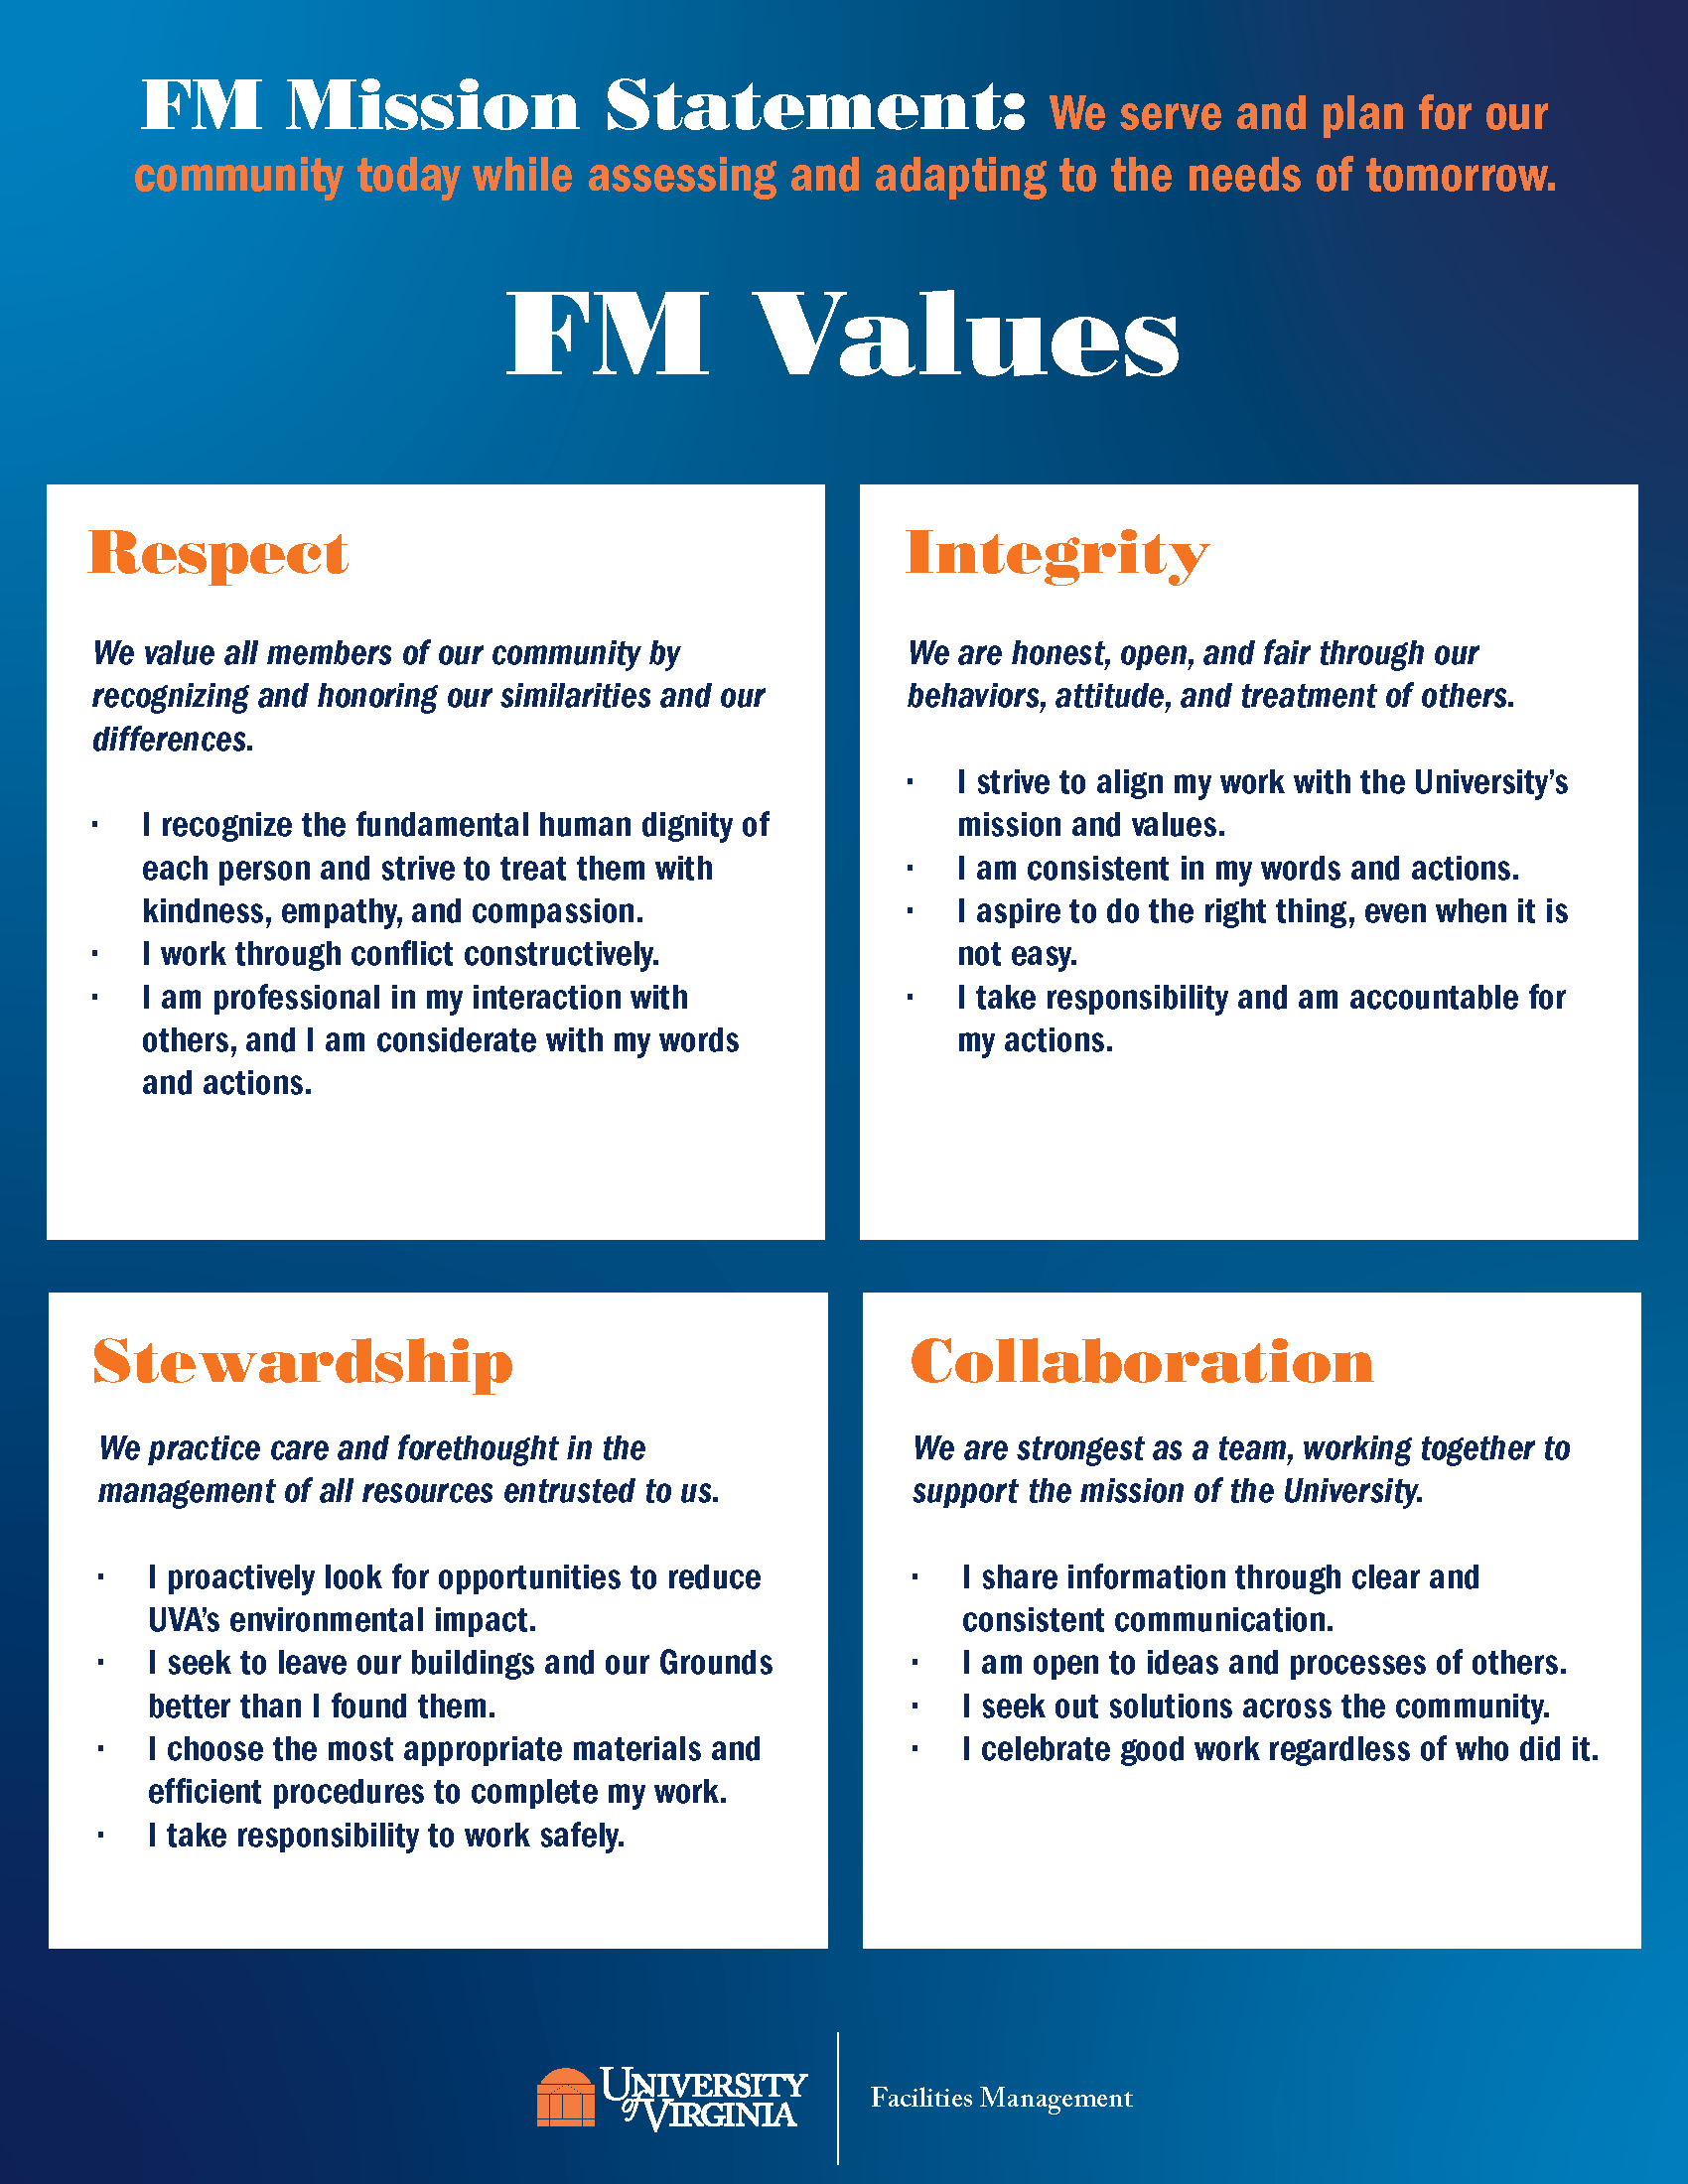 Four quadrants with highlights of FM Values: Respect, Integrity, Stewardship and Collaboration